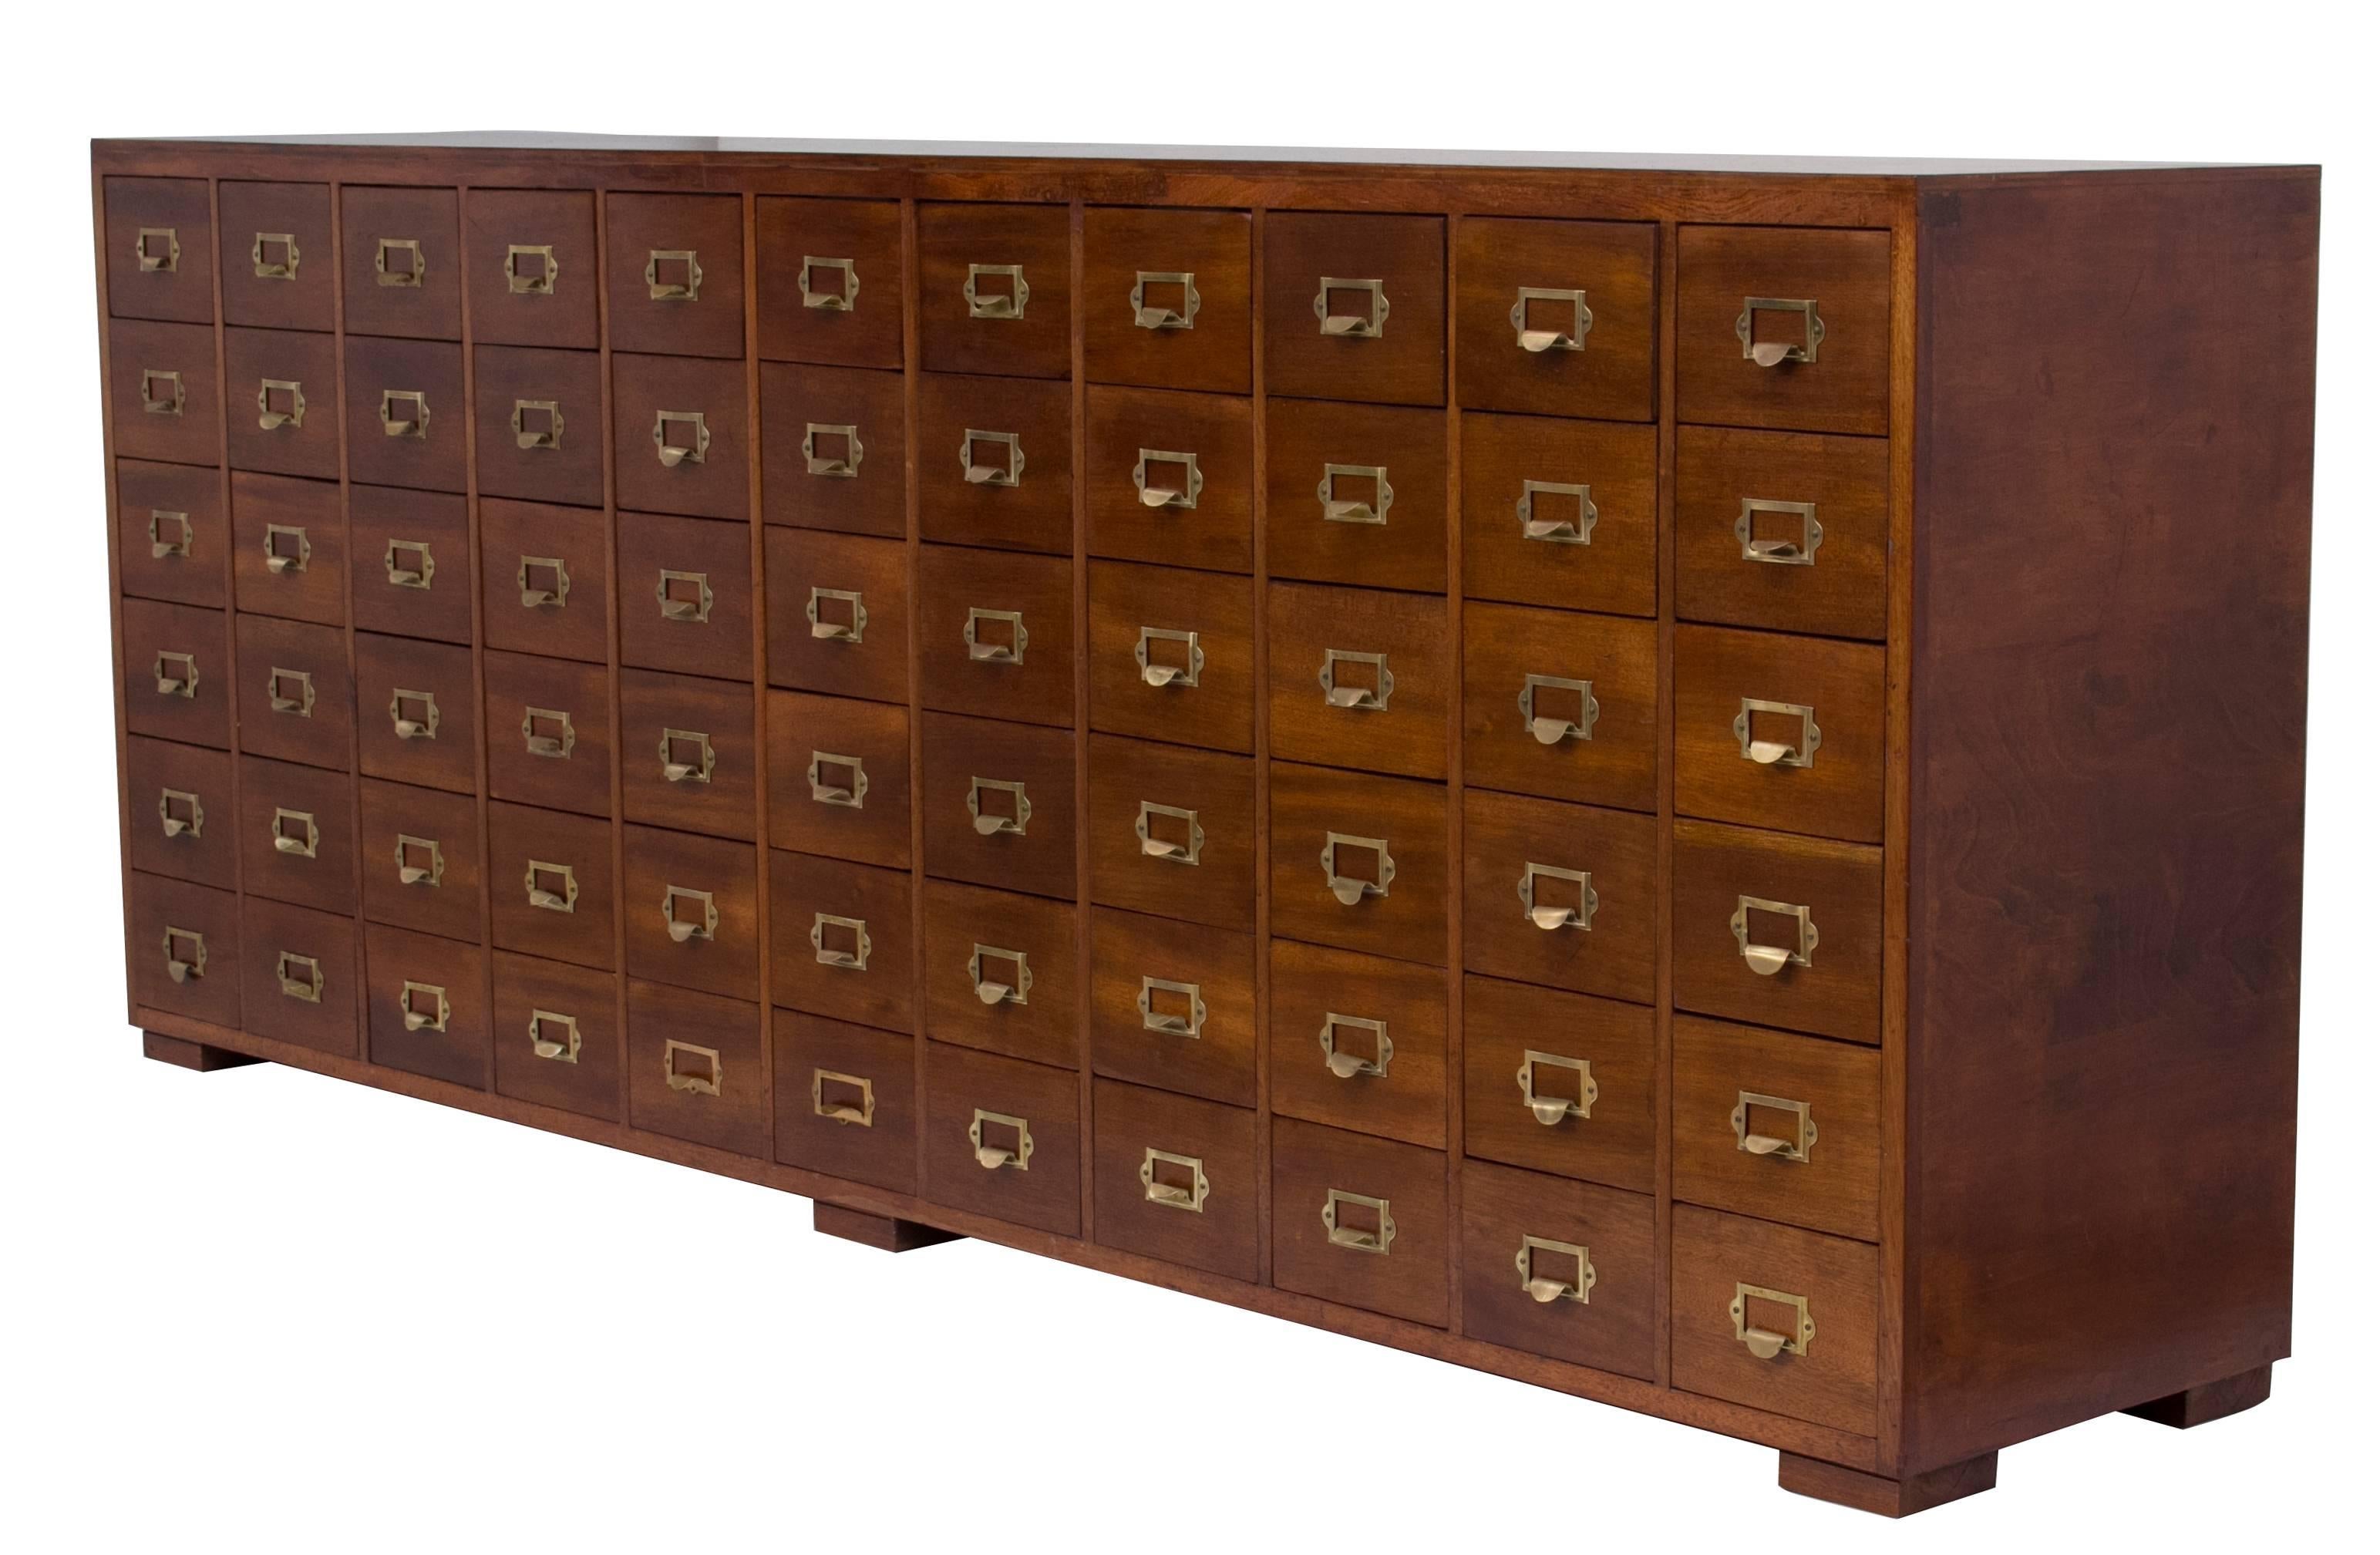 Mahogany bank of drawers with ply sides and top French polished to match the rest of cabinet, new block feet added as they were originally fitted units.
The price is for one but two identical are available.